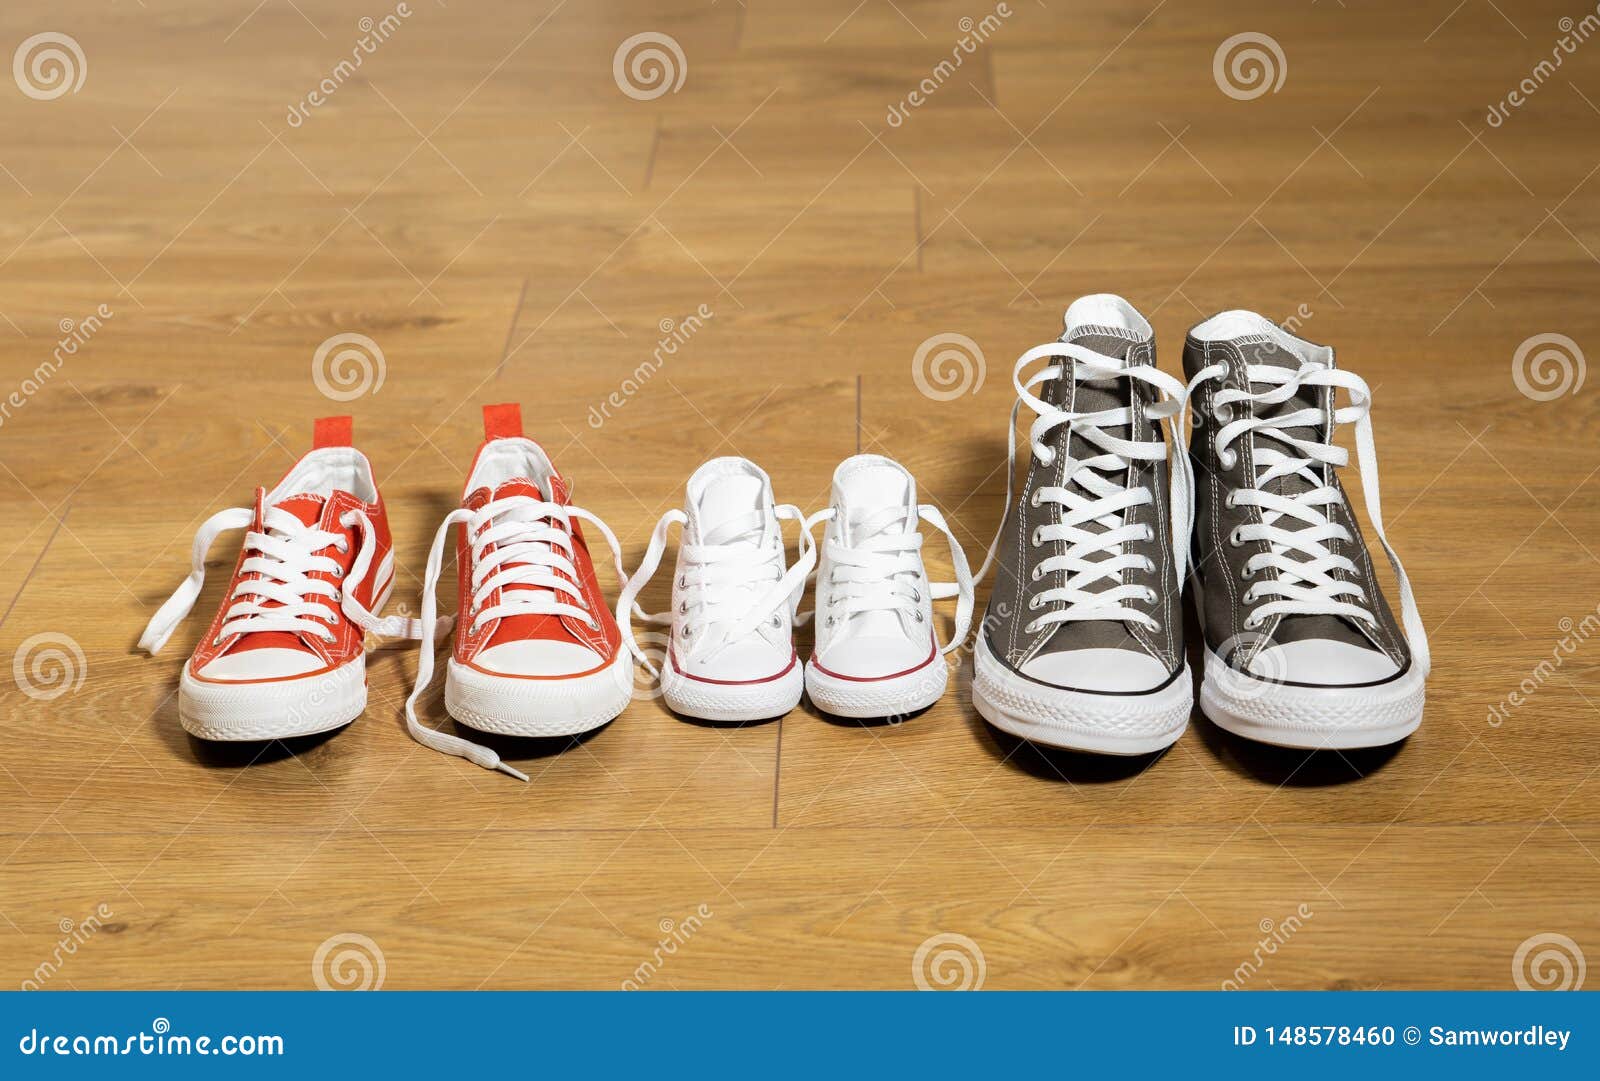 Family Sneakers Canvas Shoes Parents and Child on Wood Floor at Home in ...